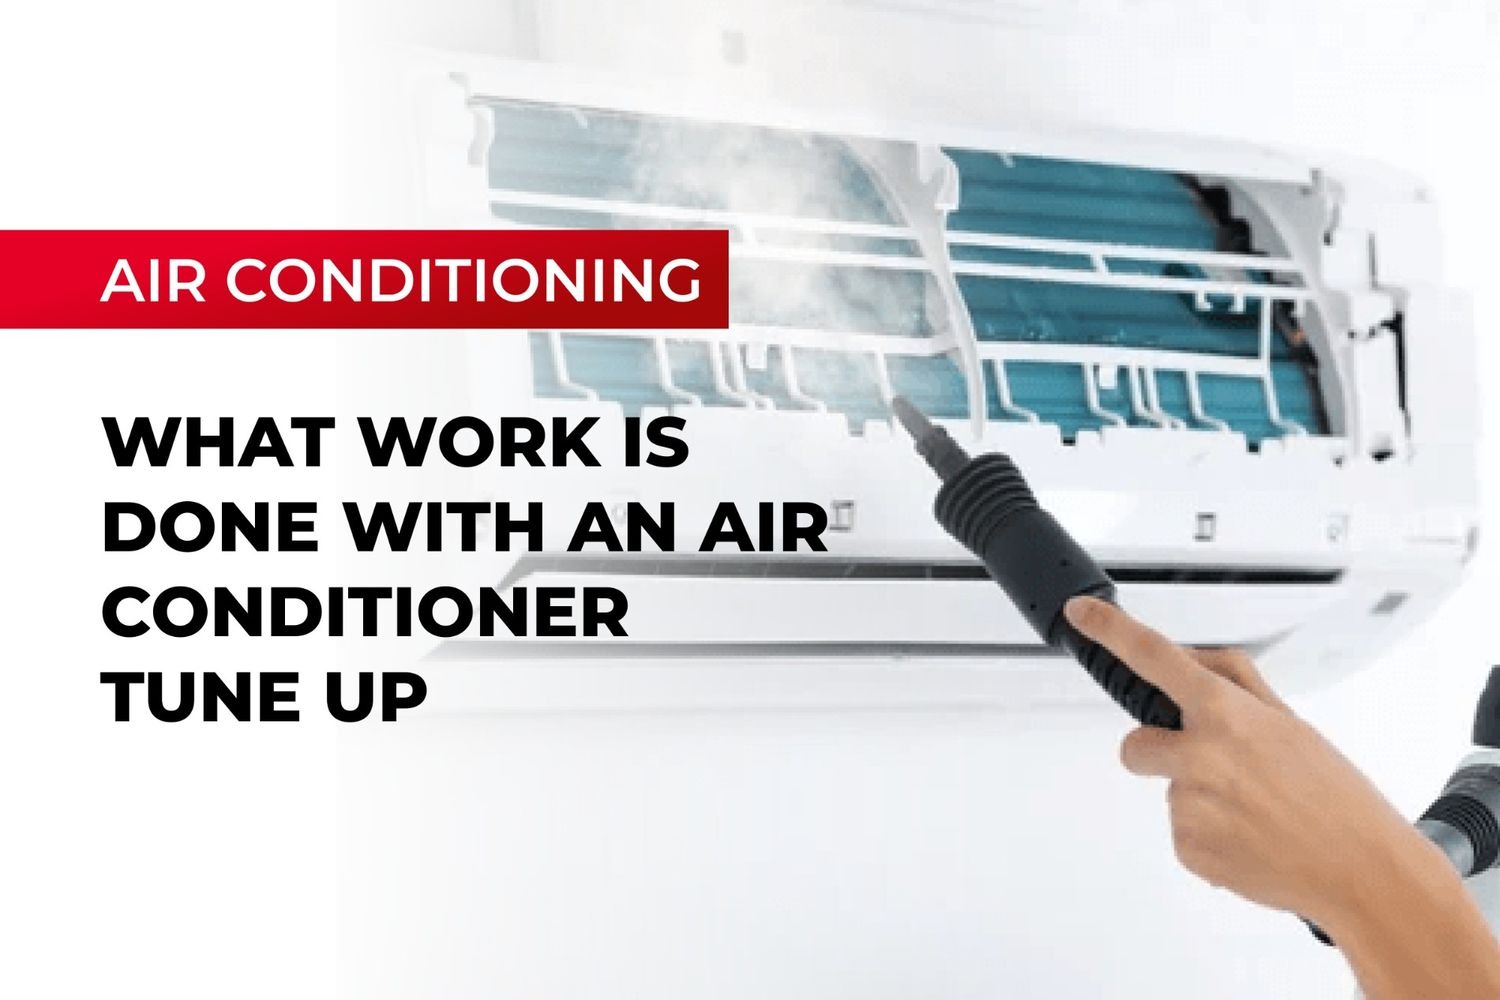 What Work Is Done With An Air Conditioner Tune-Up?